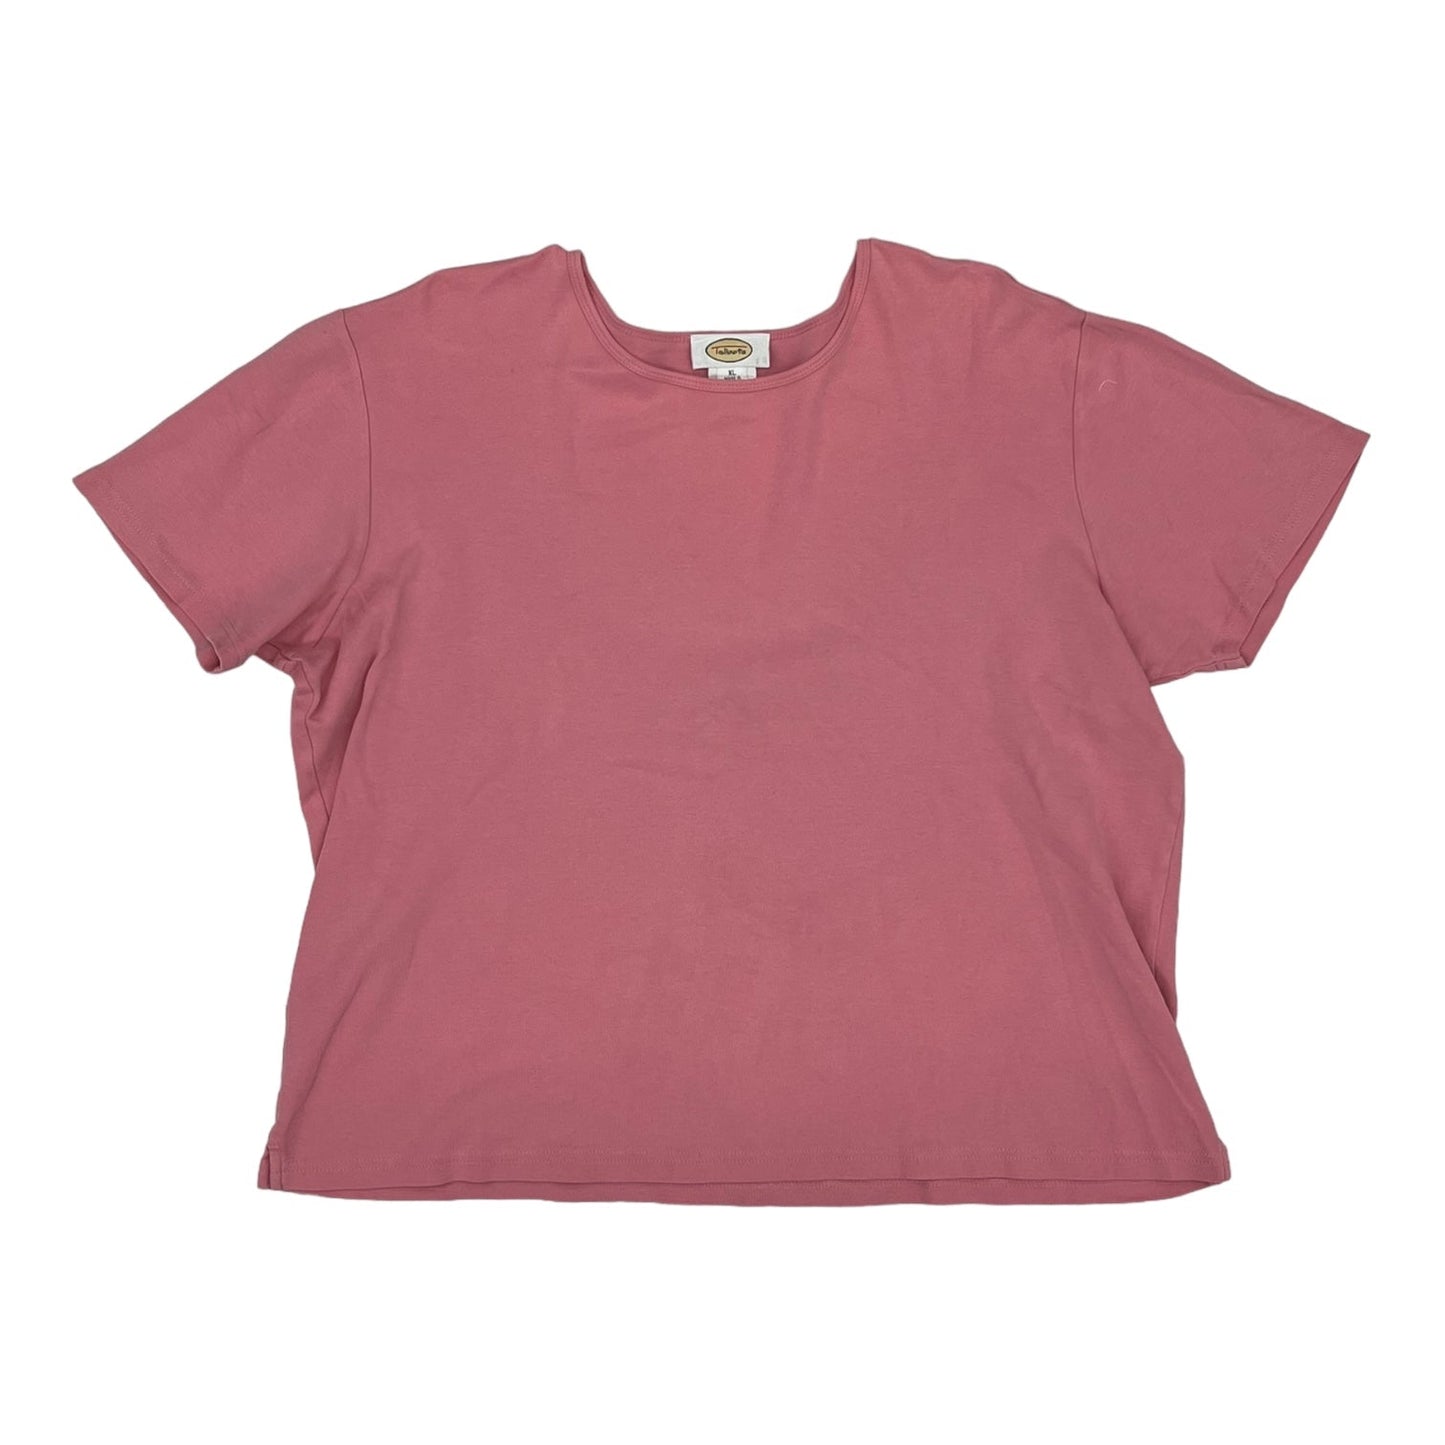 PINK TOP SS BASIC by TALBOTS Size:XL